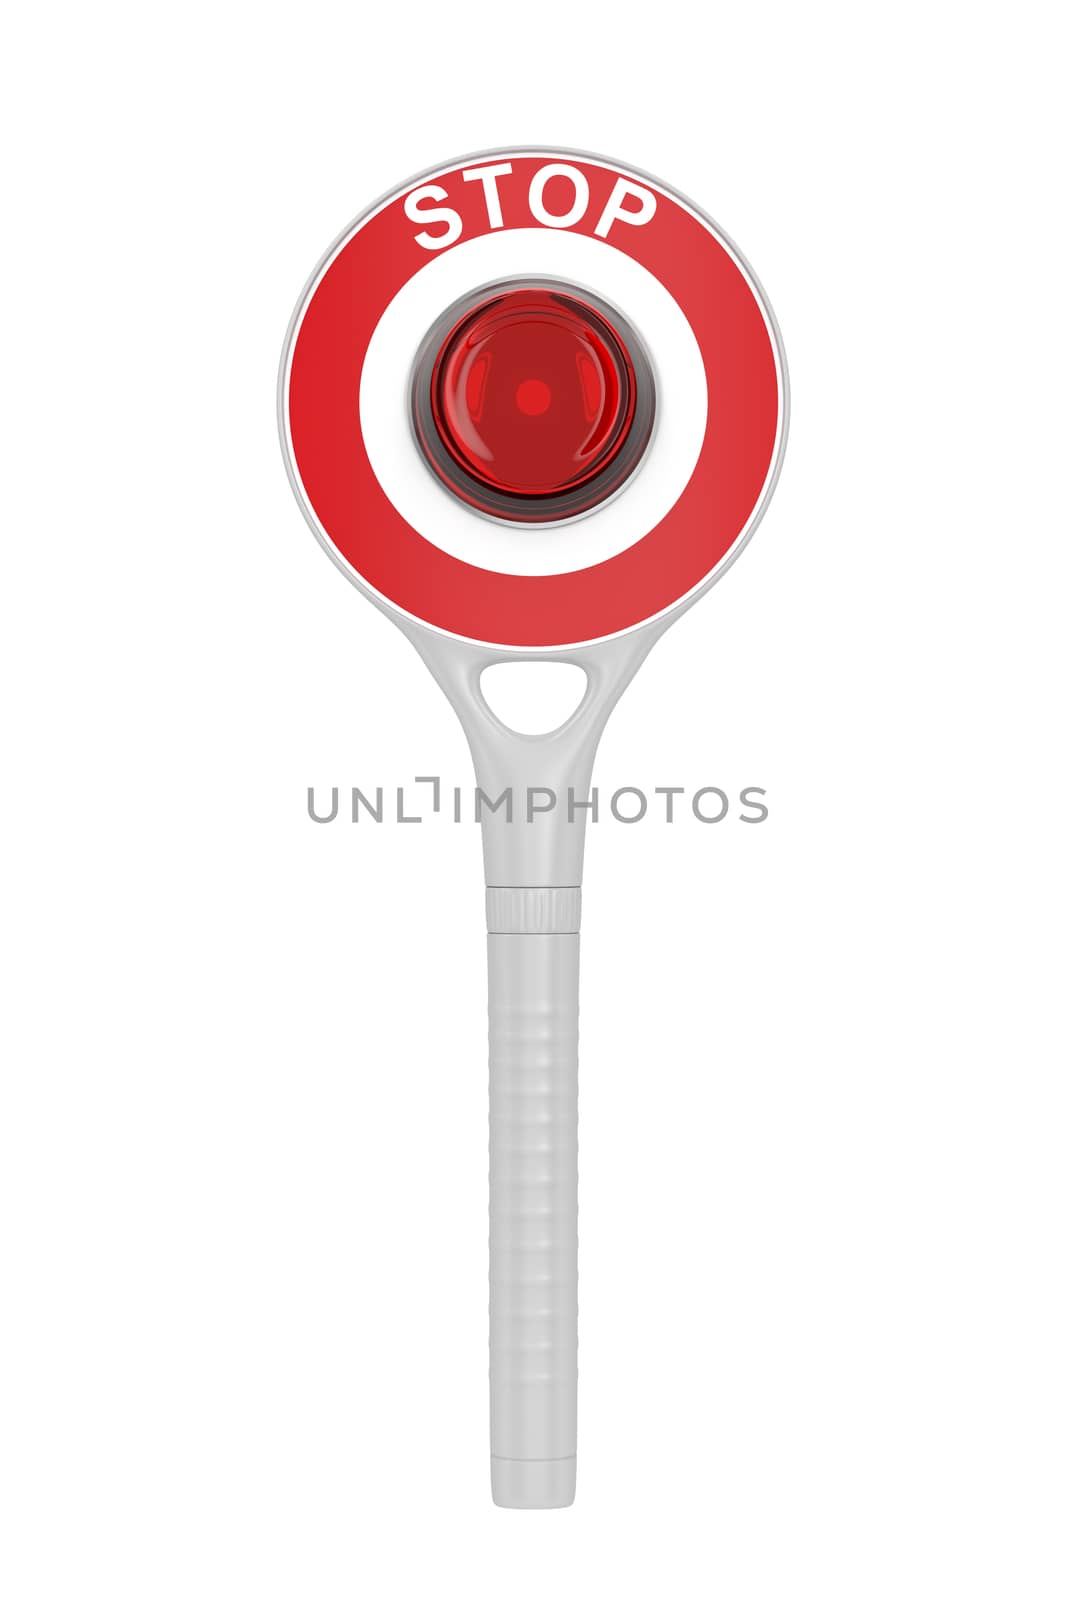 Stop sign isolated on white background